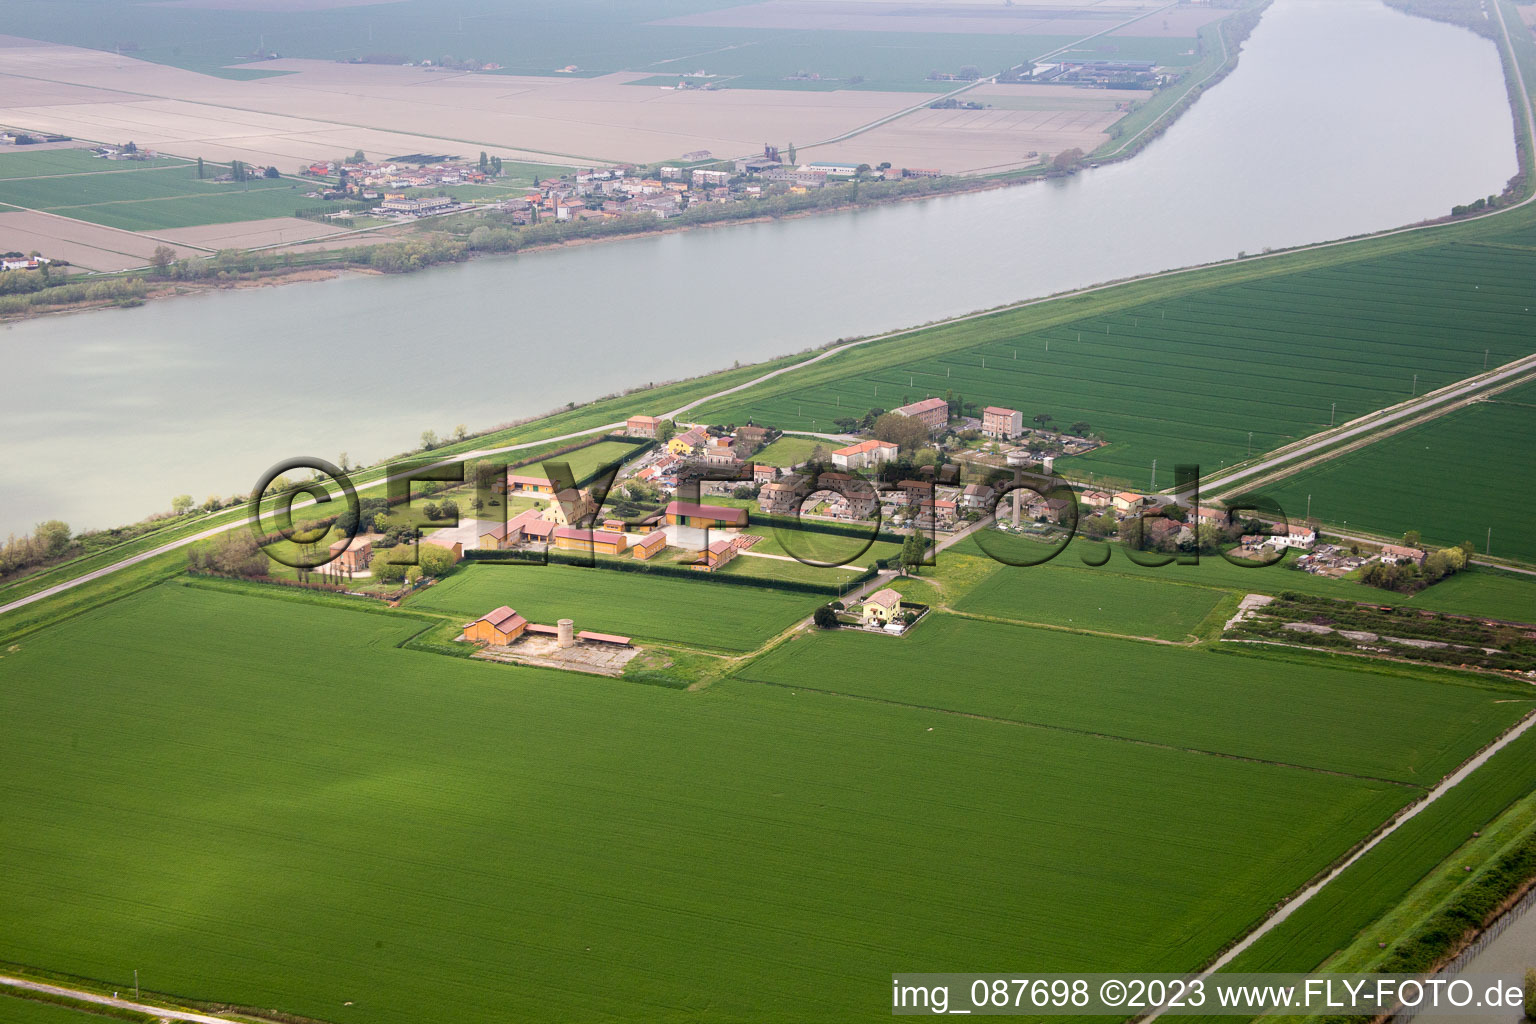 Aerial view of Ca' Zuliani in the state Veneto, Italy